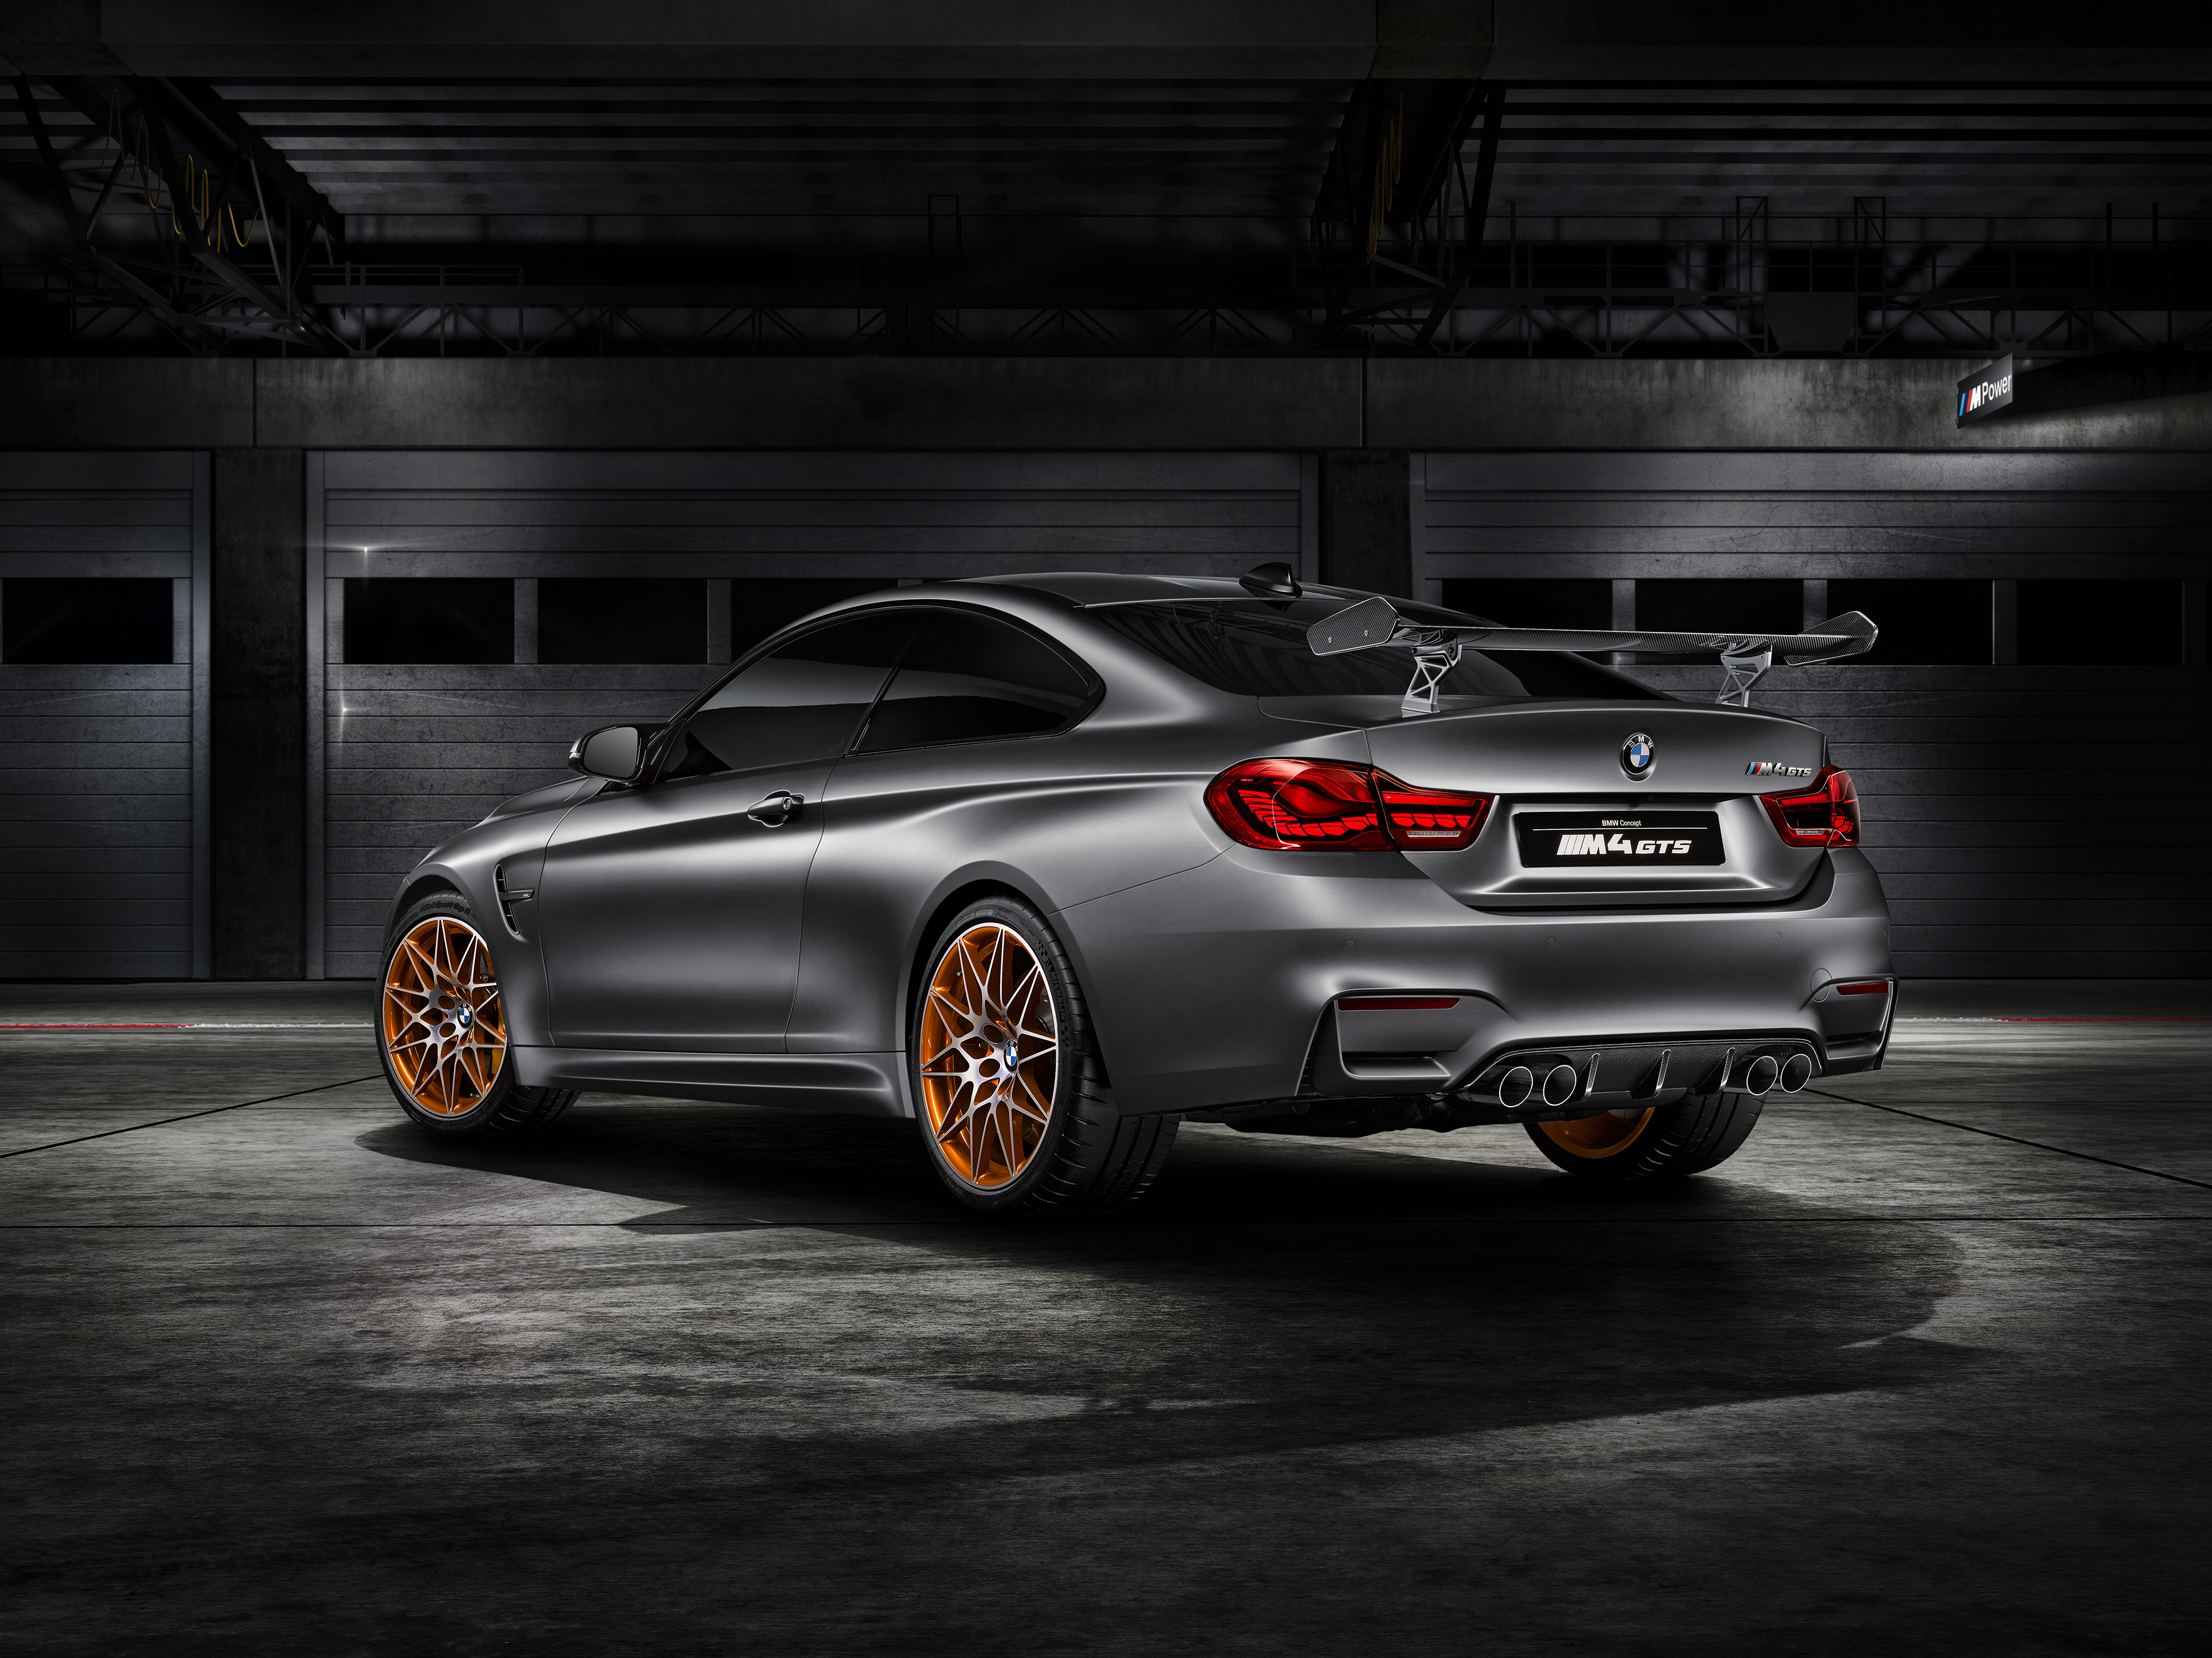 79374 download wallpaper bmw, cars, back view, rear view, silver, silvery, m4, gts, f82 screensavers and pictures for free